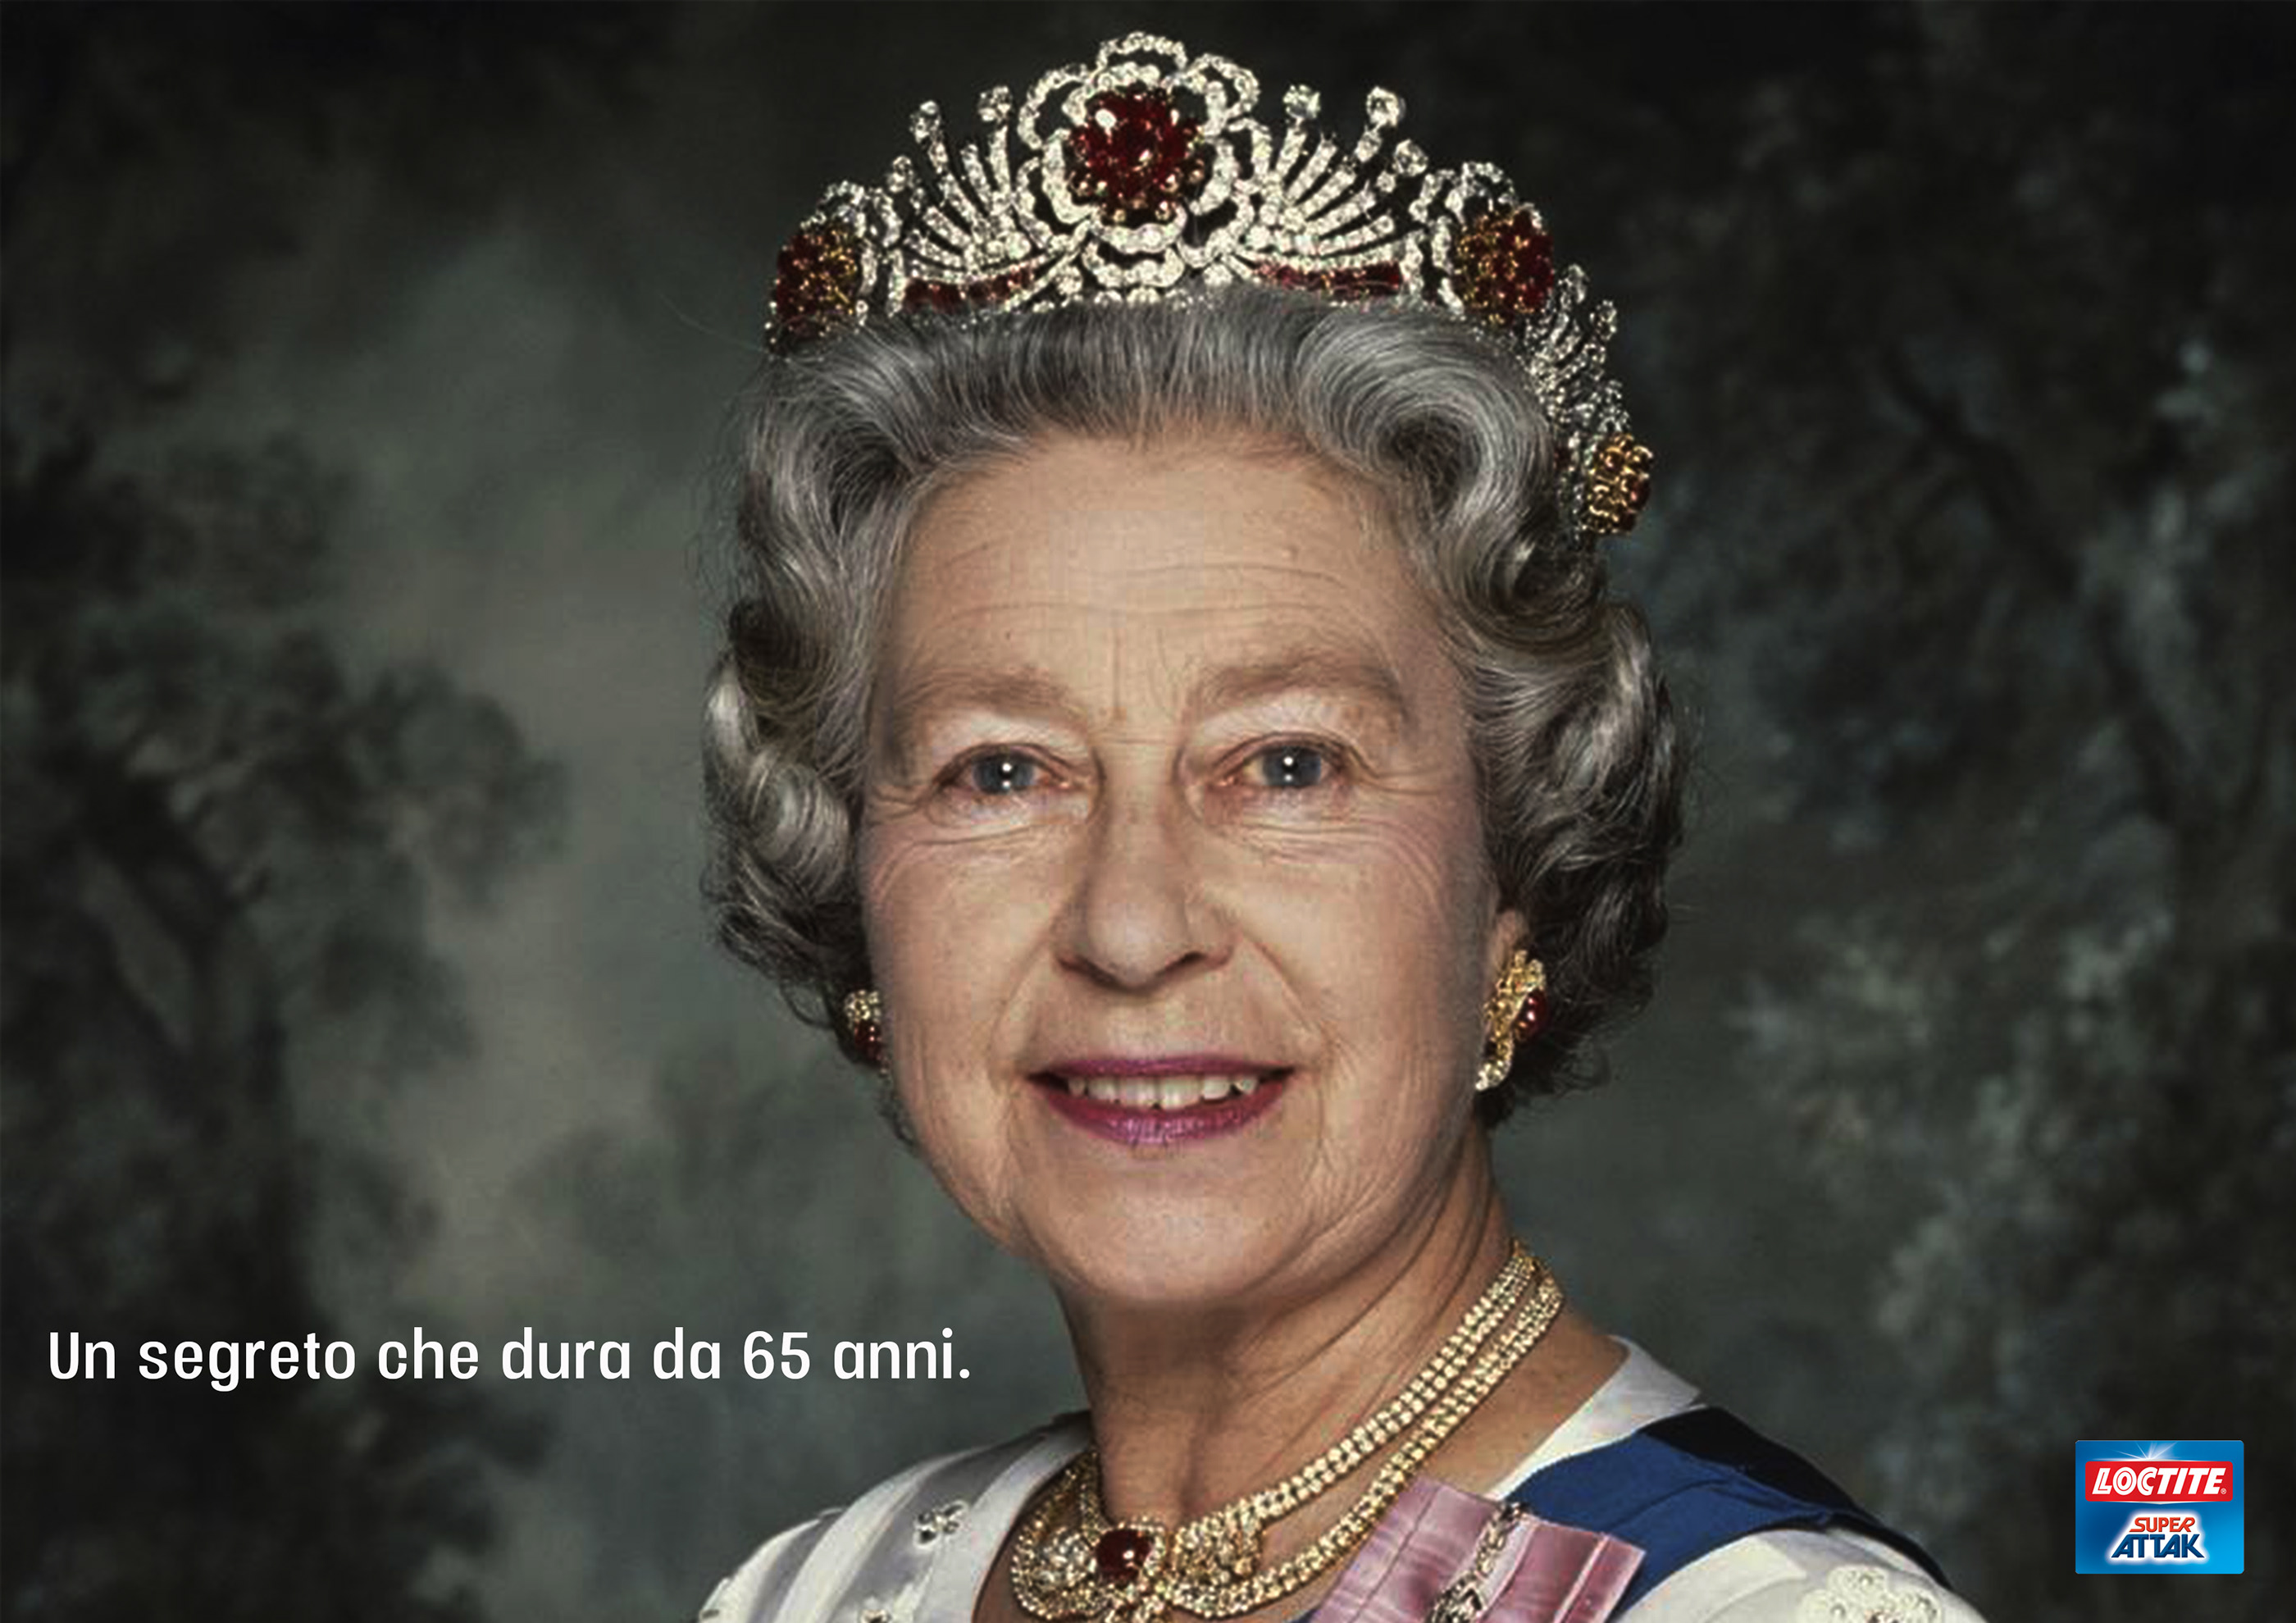 Queen of great britain. Бирманская тиара Елизаветы 2.